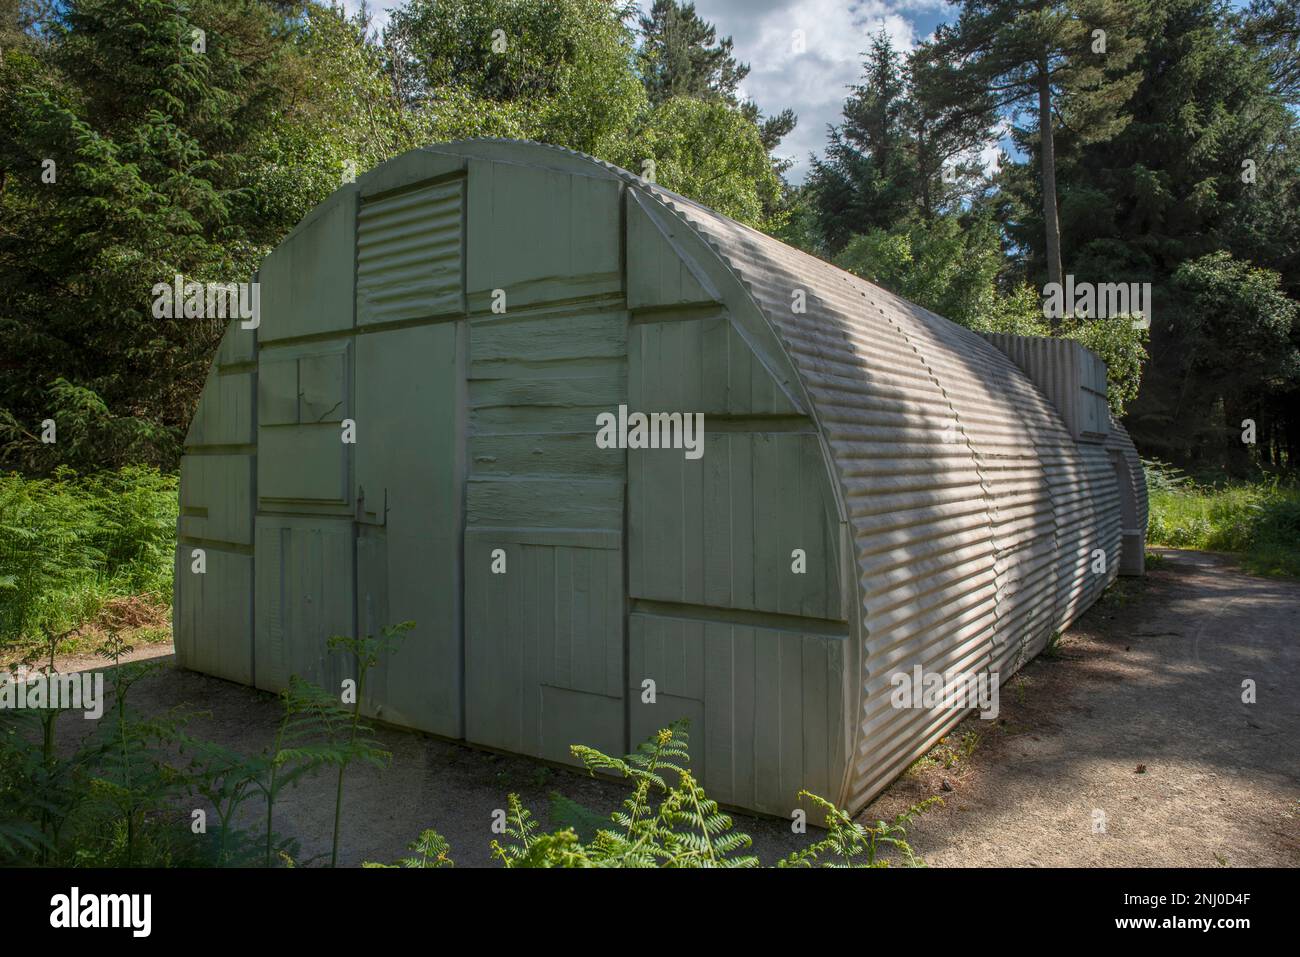 The cast concrete interior sculpture of a Nissen hut by artist Rachel Whiteread in the Dalby Forest near Pickering, North Yorkshire, UK Stock Photo